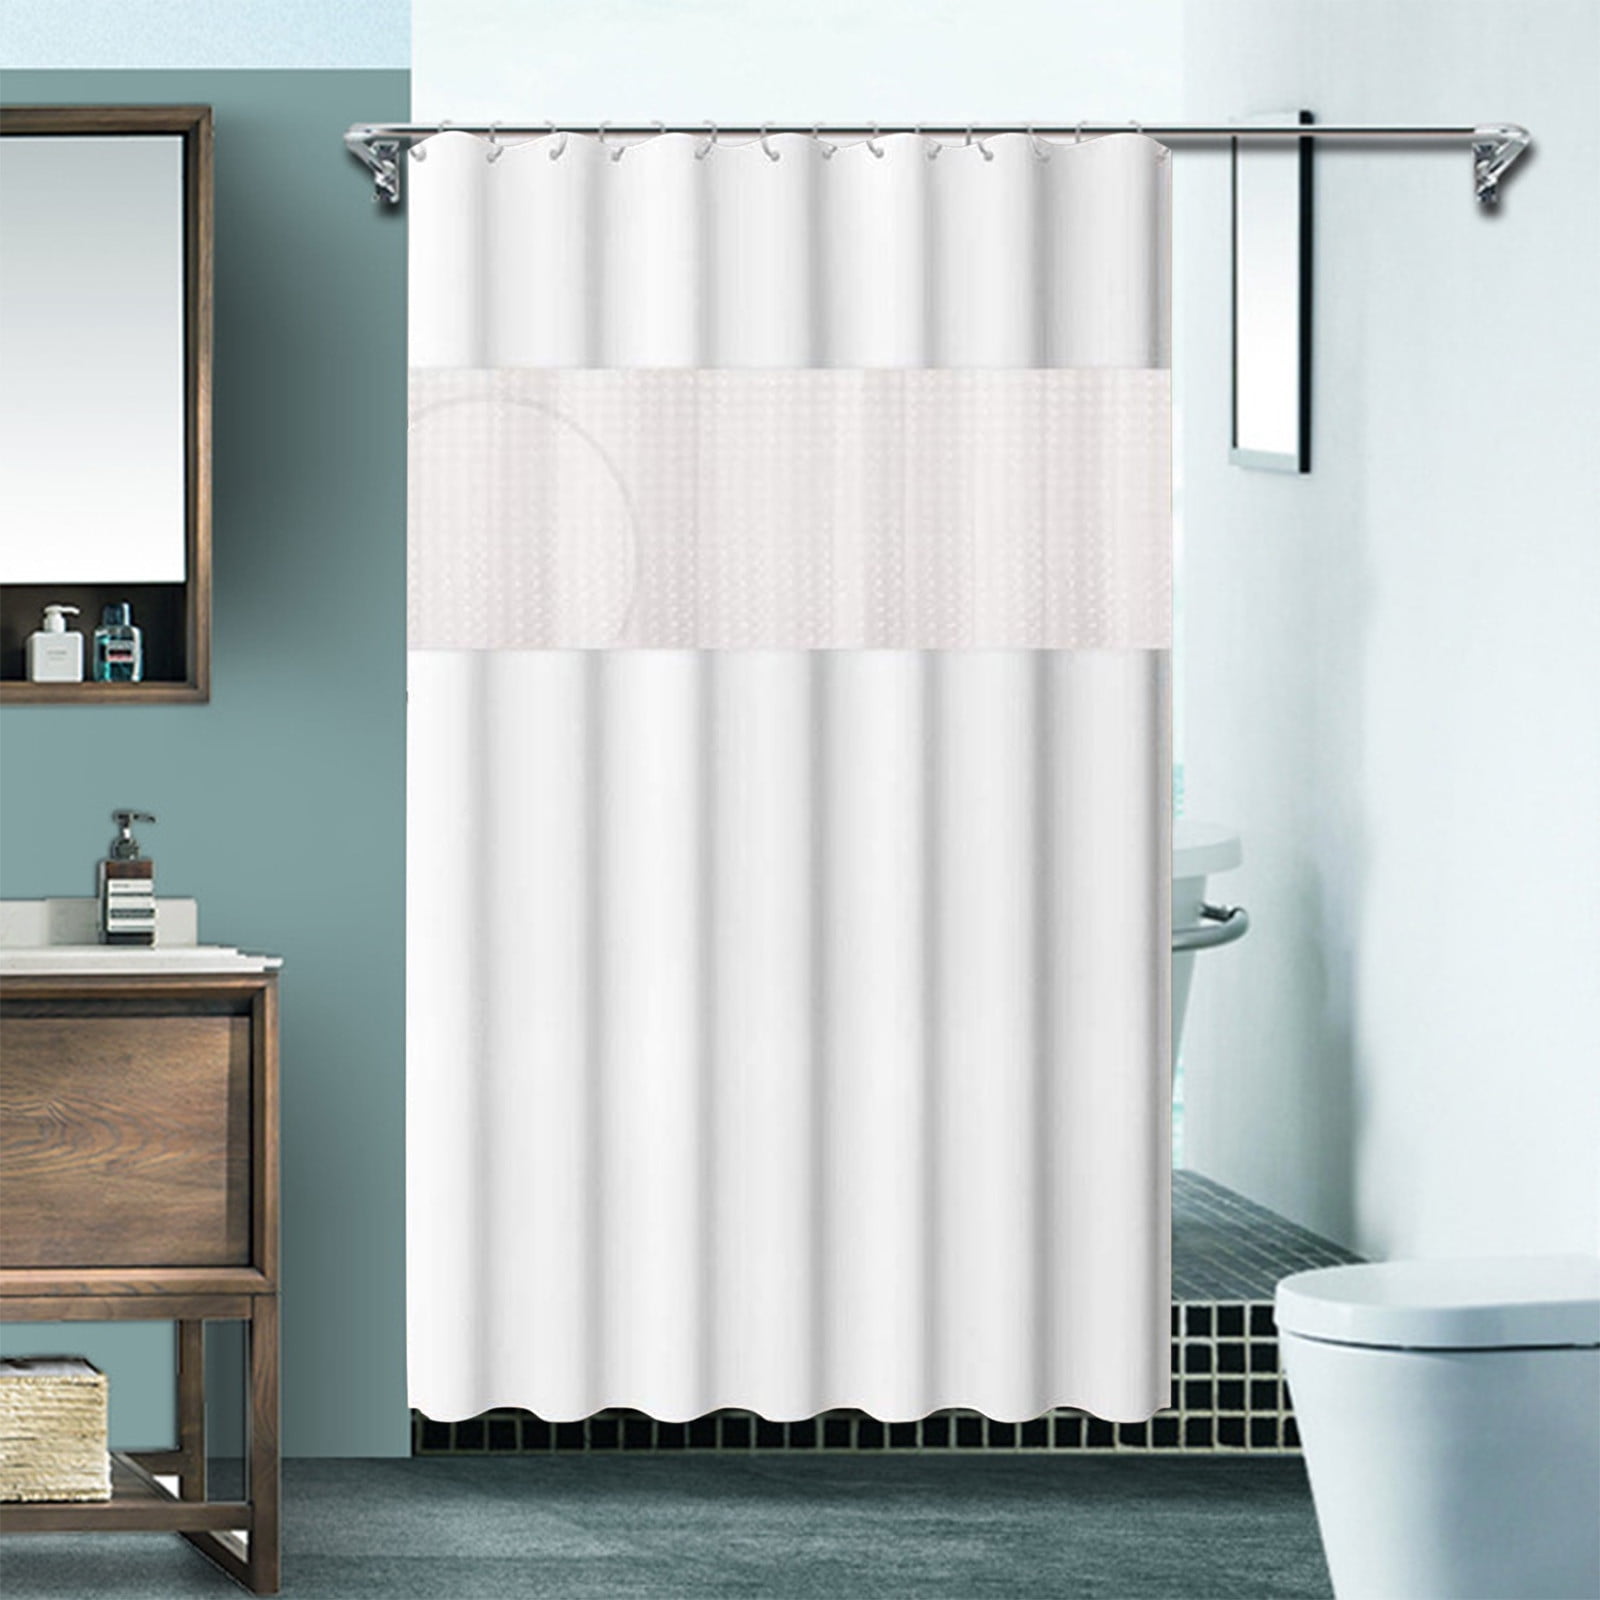 AURIGATE Weave Shower Curtain with Snap-in Fabric Liner & Hooks